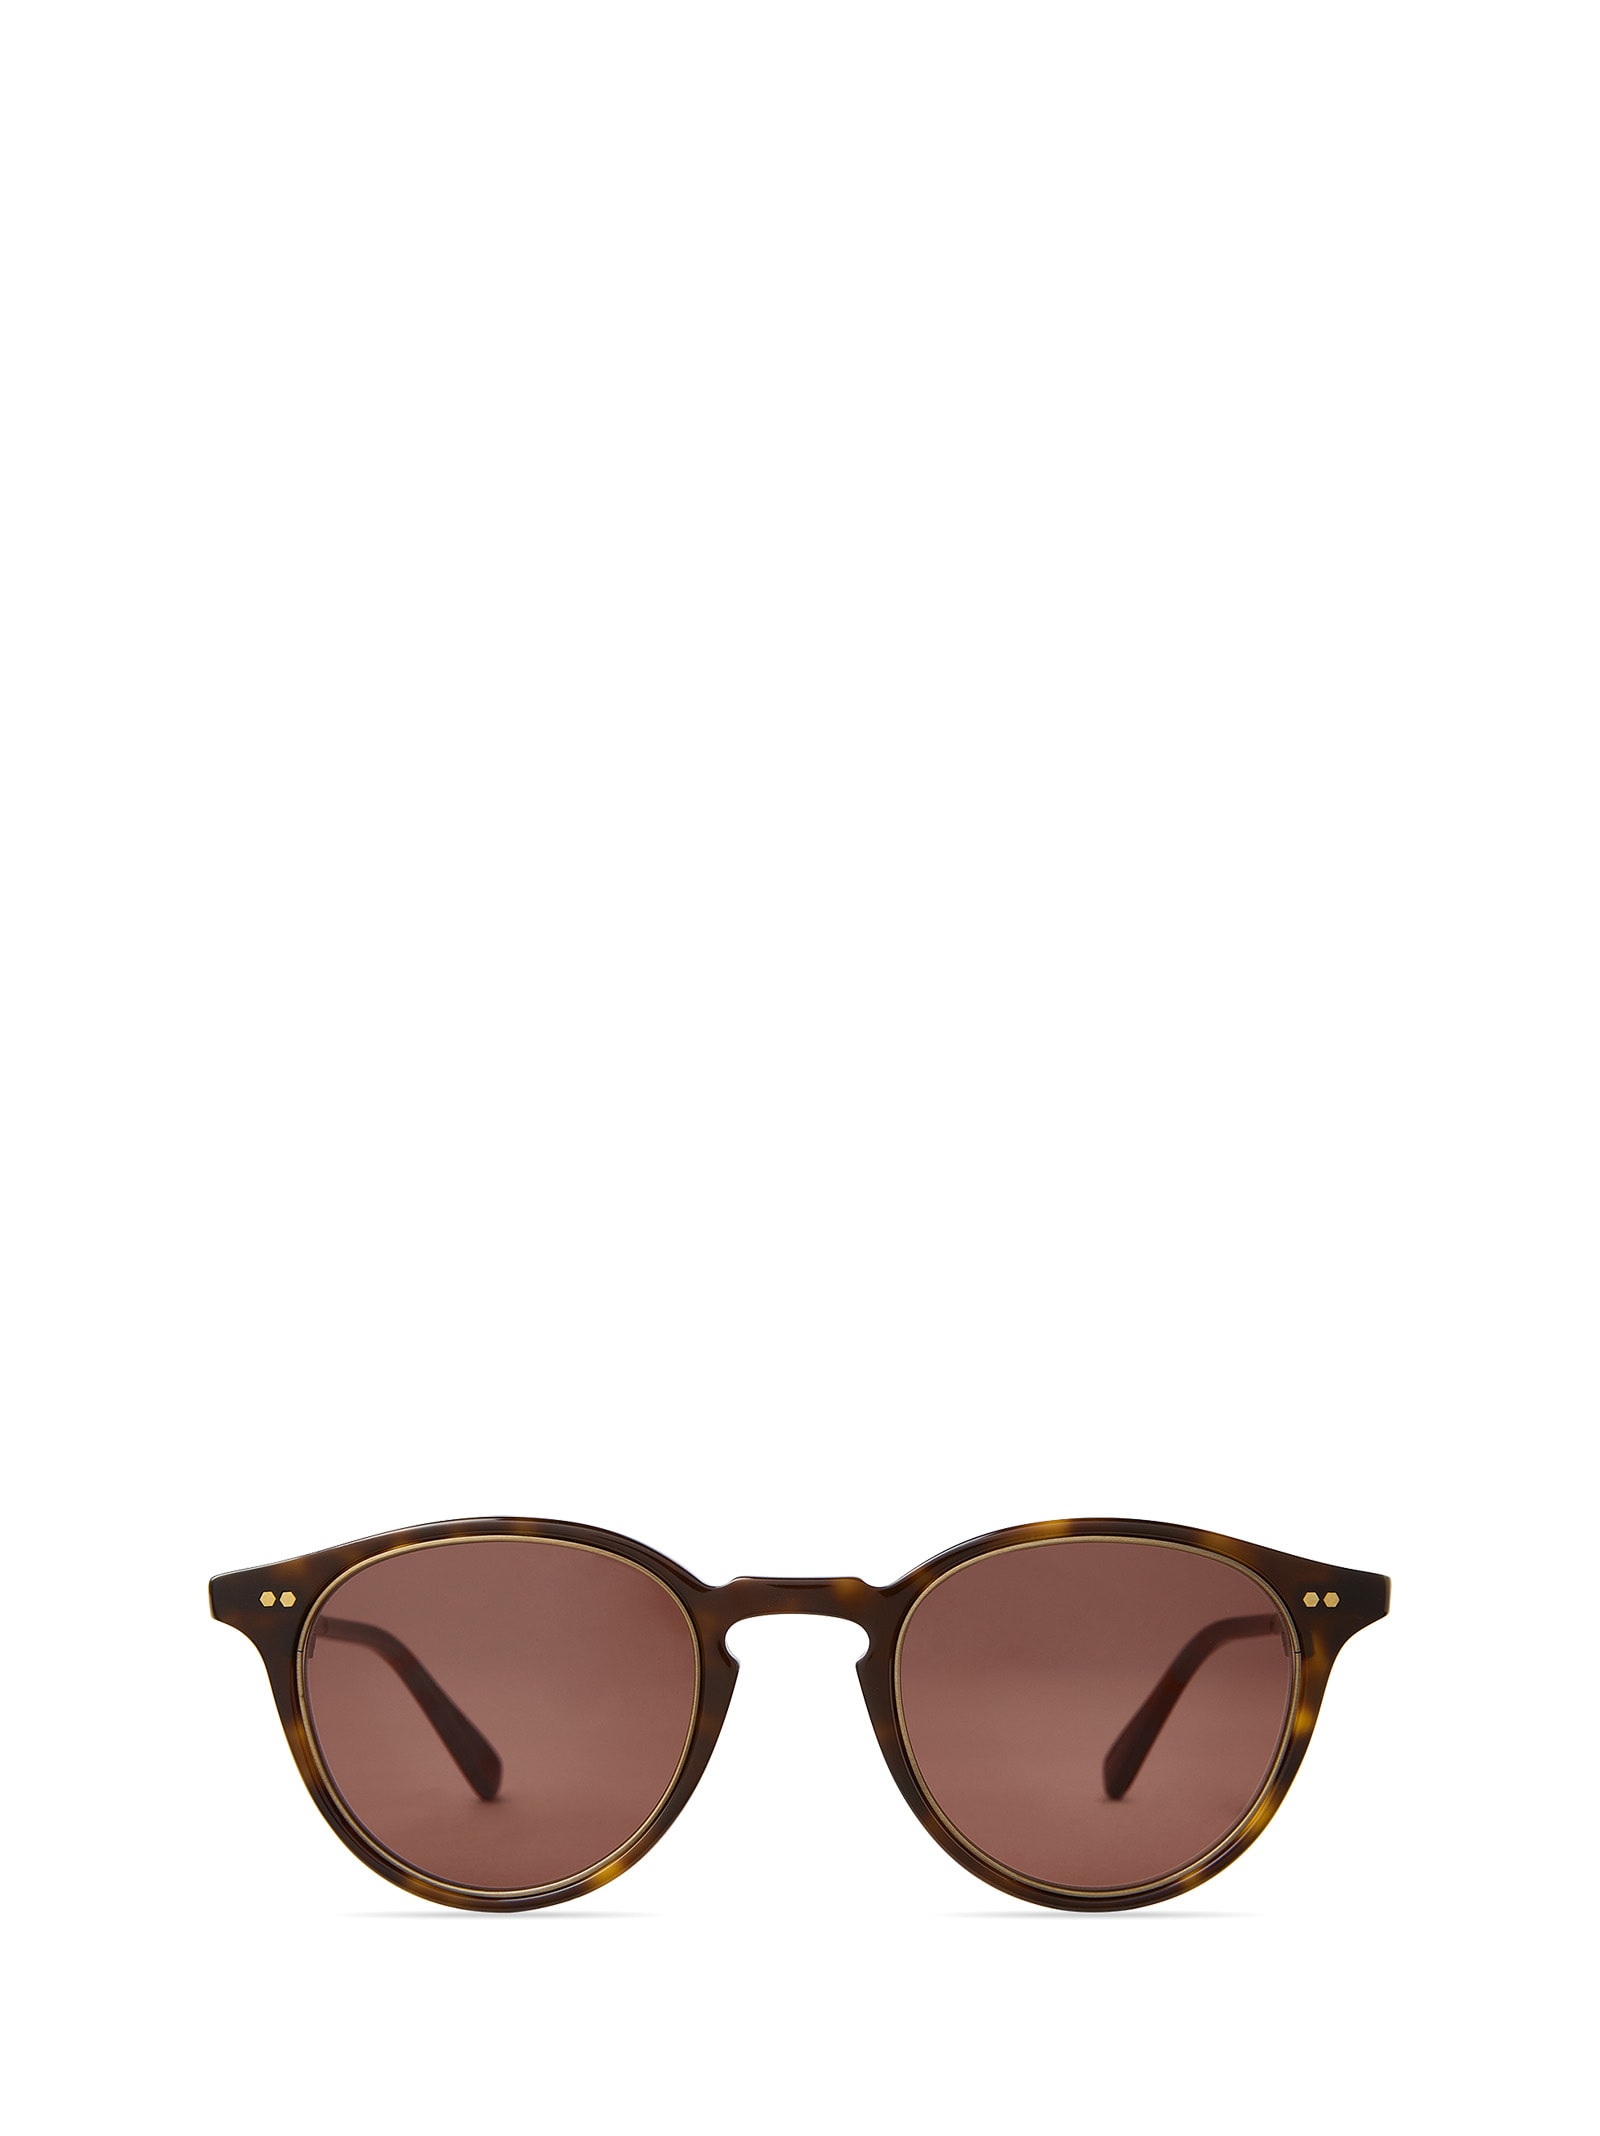 Mr Leight Marmont Ii S Hickory Tortoise-antique Gold Sunglasses